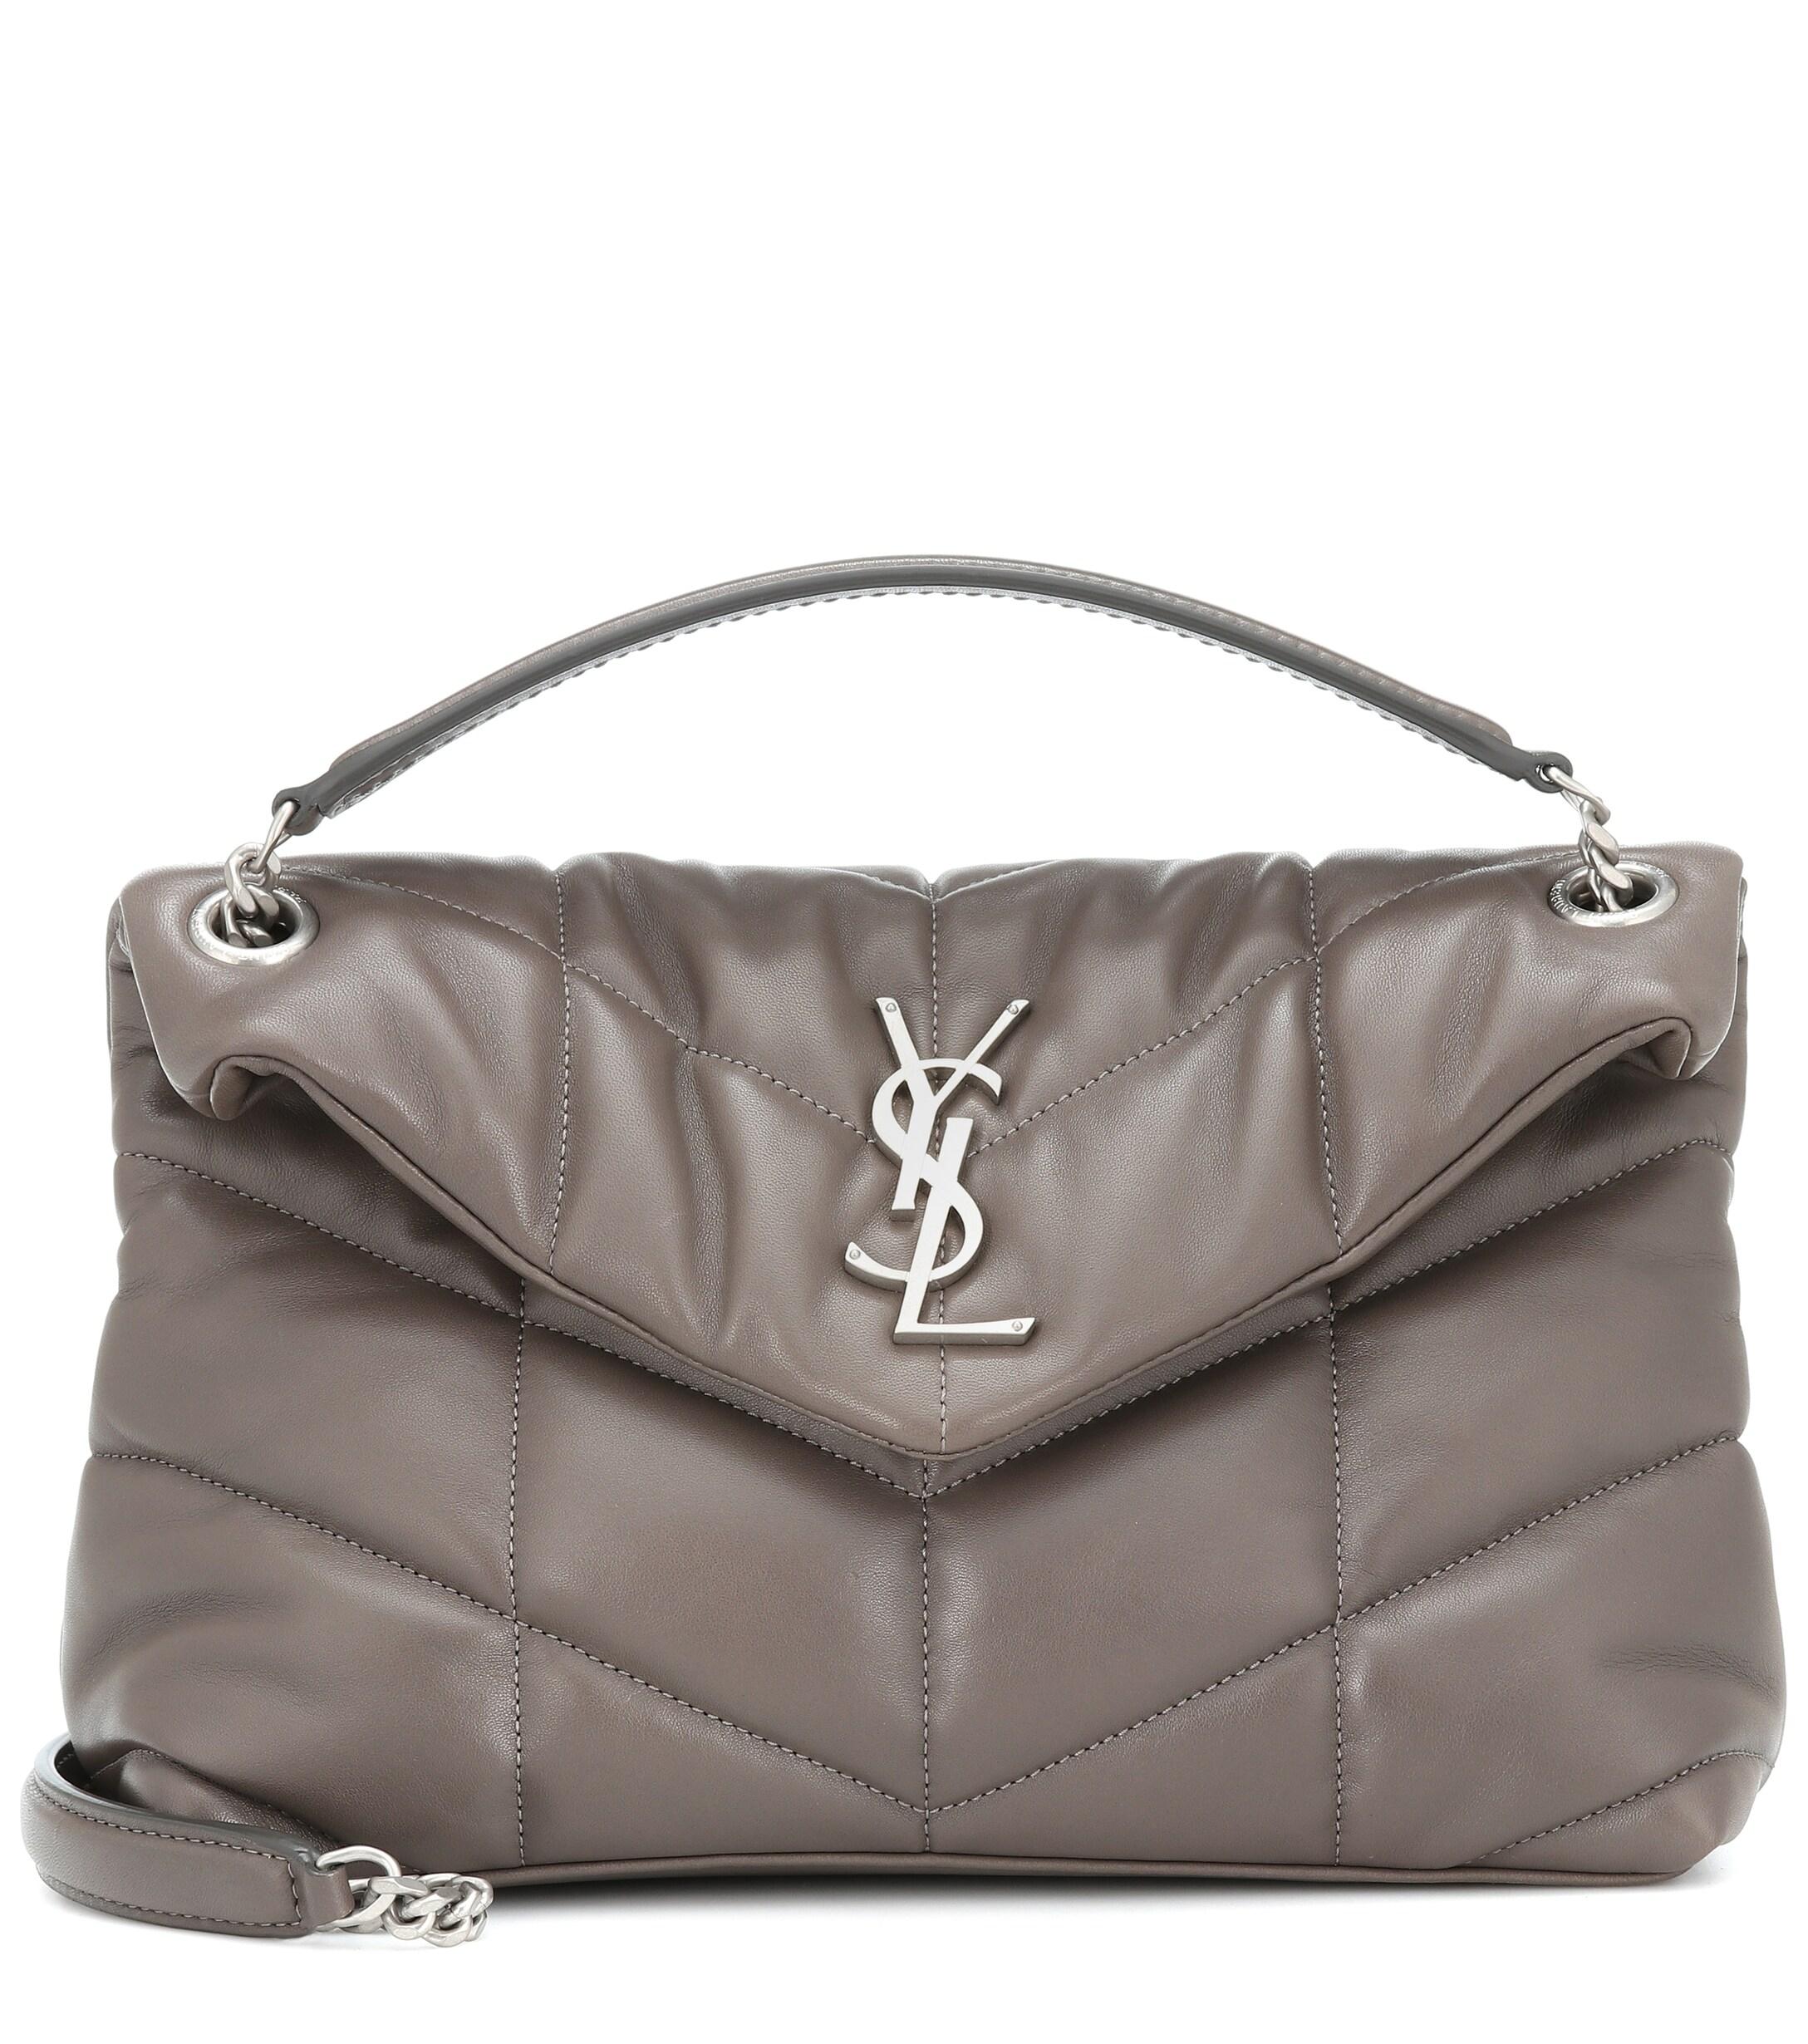 Saint Laurent Loulou Puffer Small Shoulder Bag in Gray | Lyst